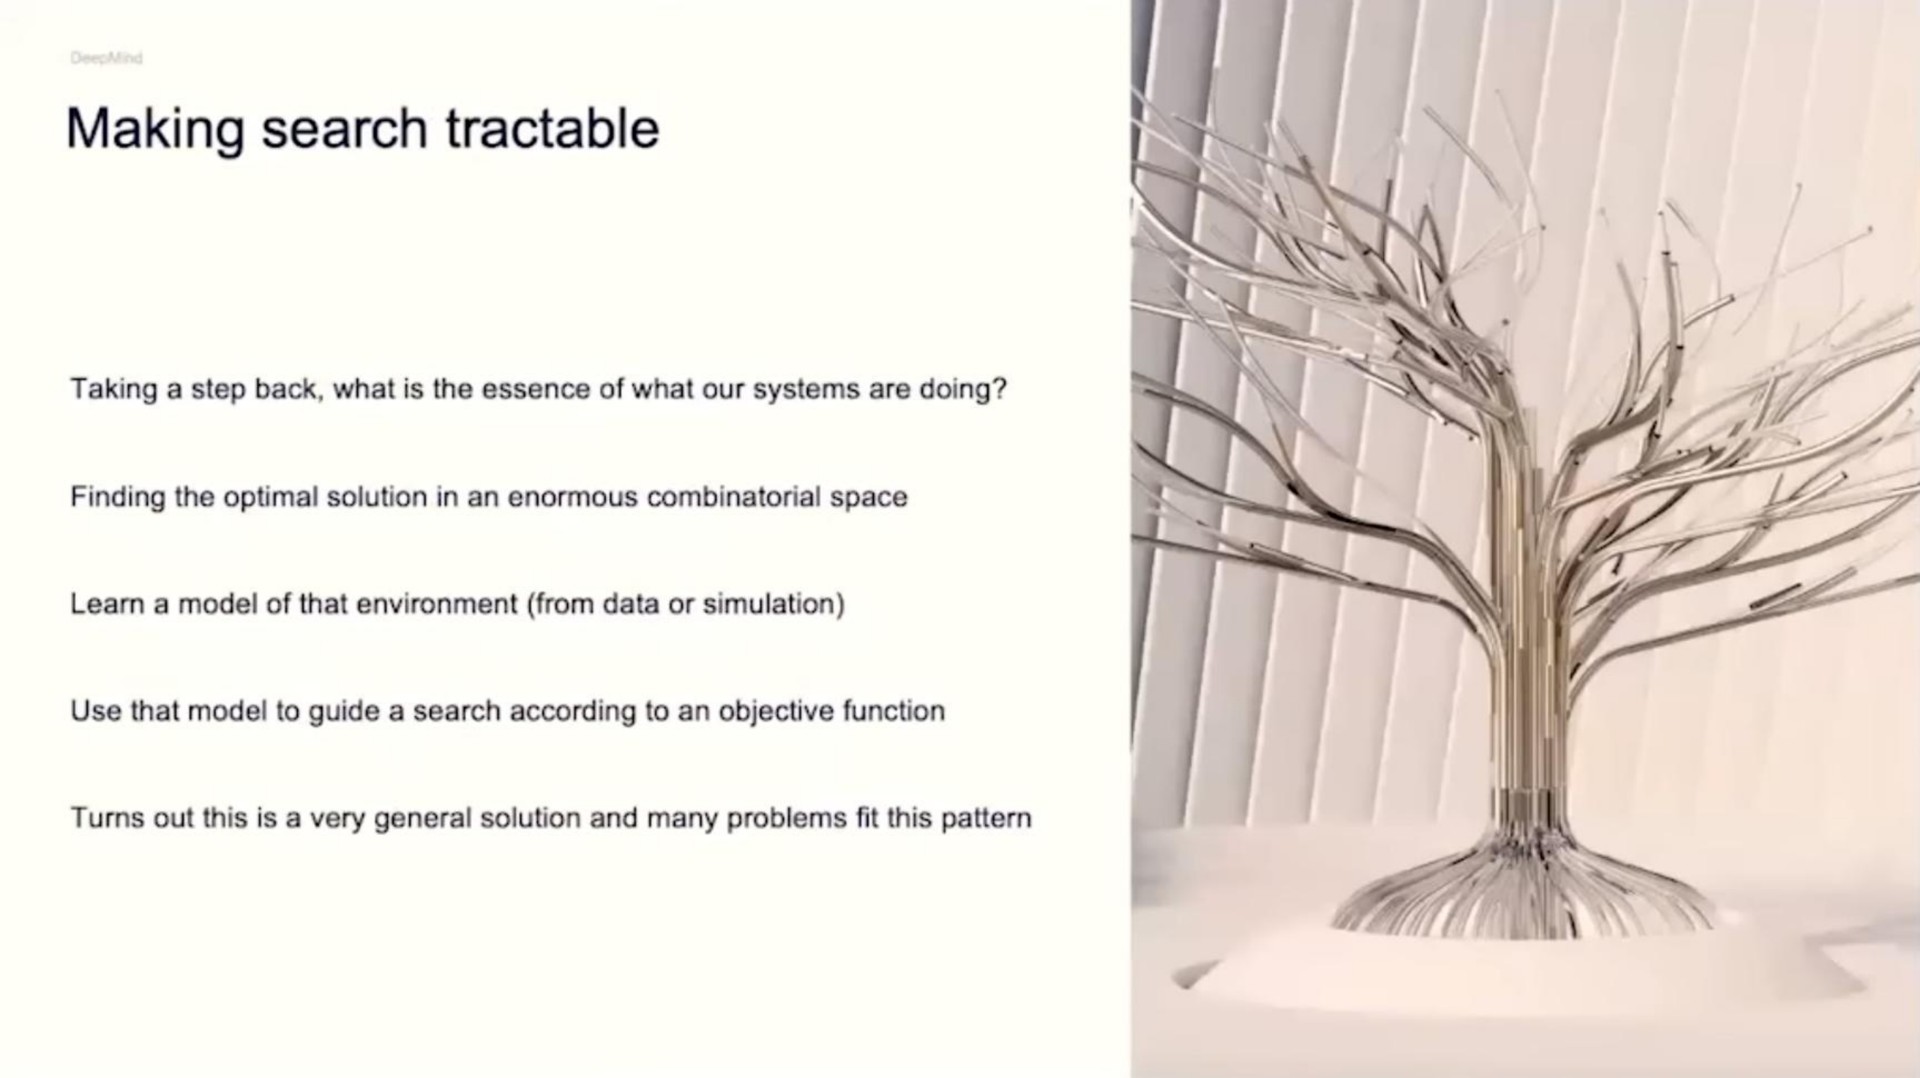 making search tractable taking a step back what is the essence of what our systems are doing finding the optimal solution in an enormous combinatorial space learn a model of that environment from data or simulation use that model to guide a search according to an objective function turns out this is a very general solution and many problems fit this pattern | DeepMind